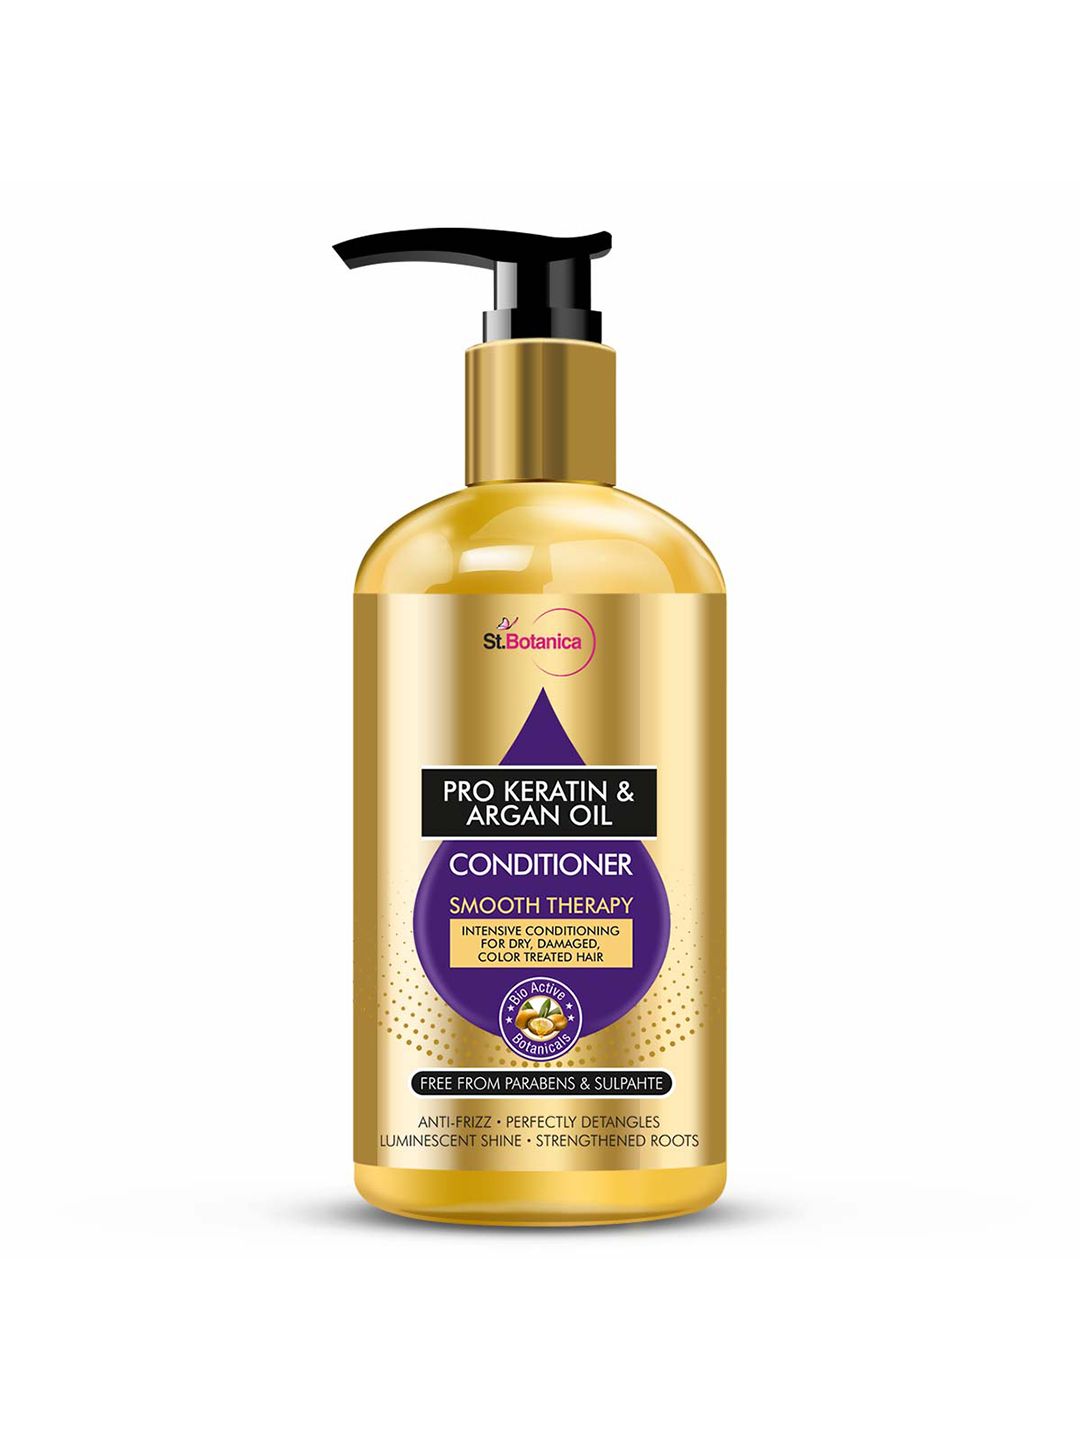 StBotanica Pro Keratin & Argan Oil Smooth Therapy Conditioner 300ml Price in India